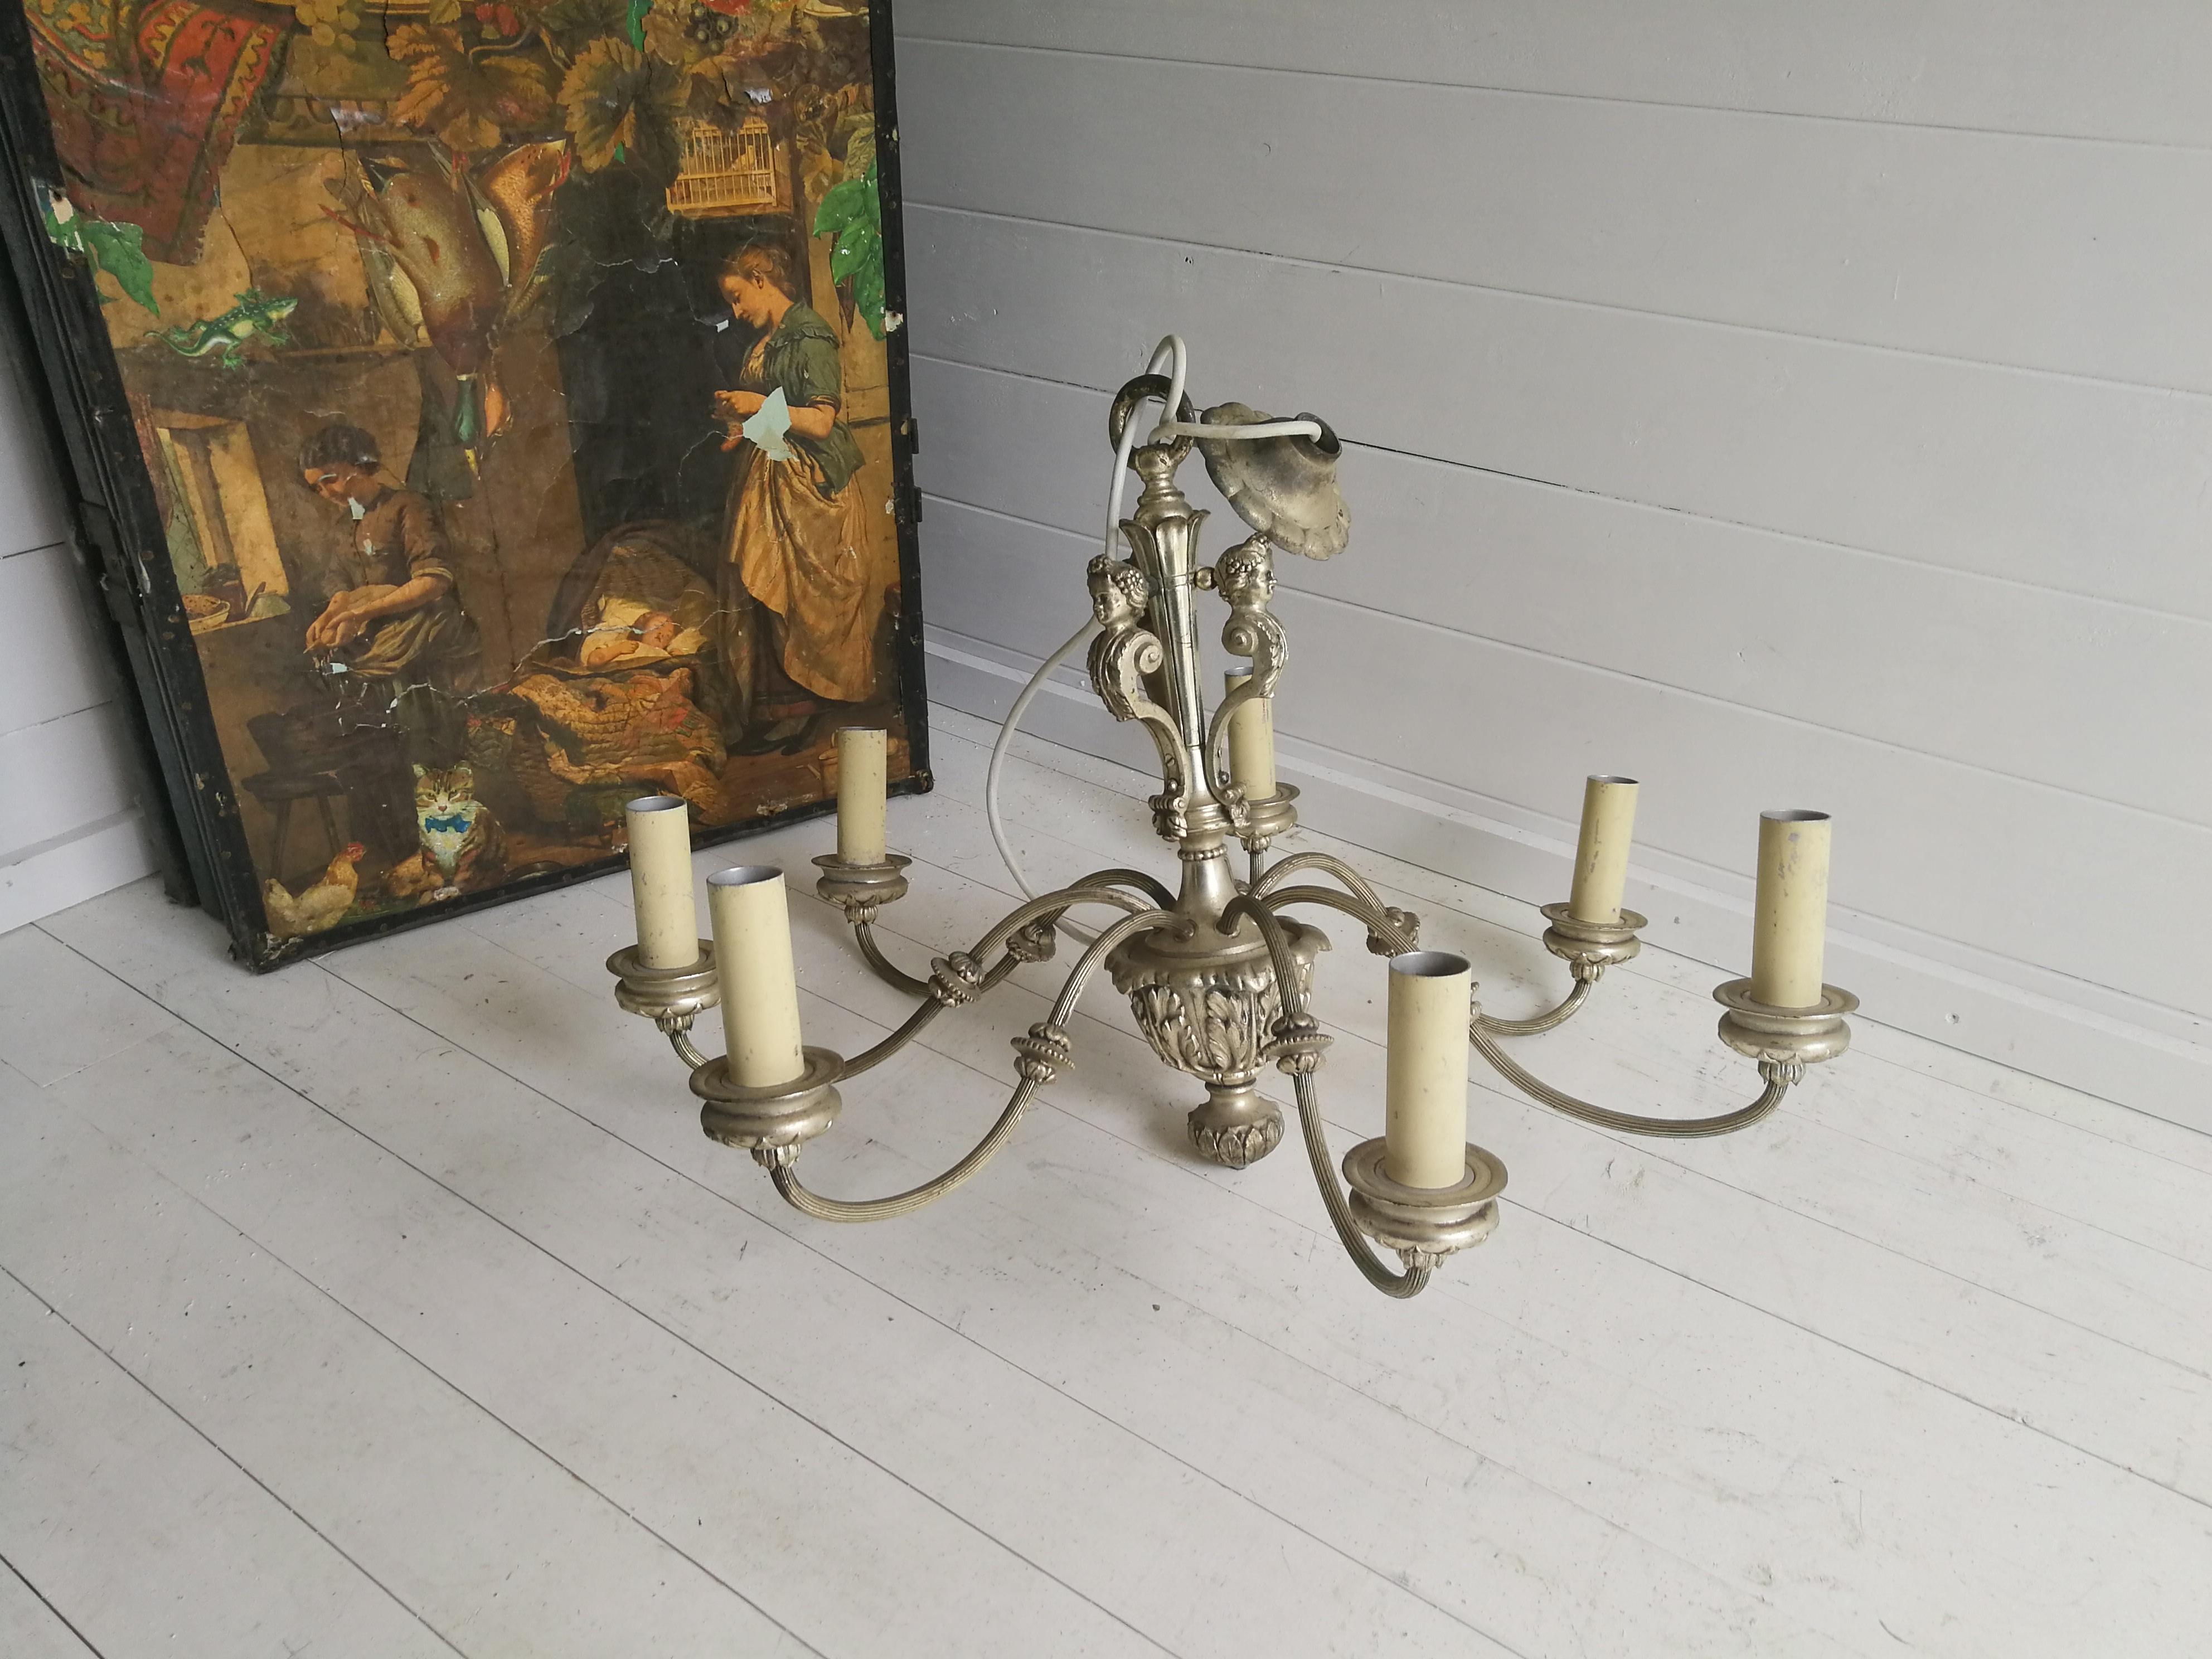 Stunning antique French Baroque style ceiling chandelier lamp with 7 arms with 3 cherub faces in its centre column.

Magnificent detail. 
Exceptionally fine and large, silver plated chandelier.
The upper section with putti over strongly scrolled